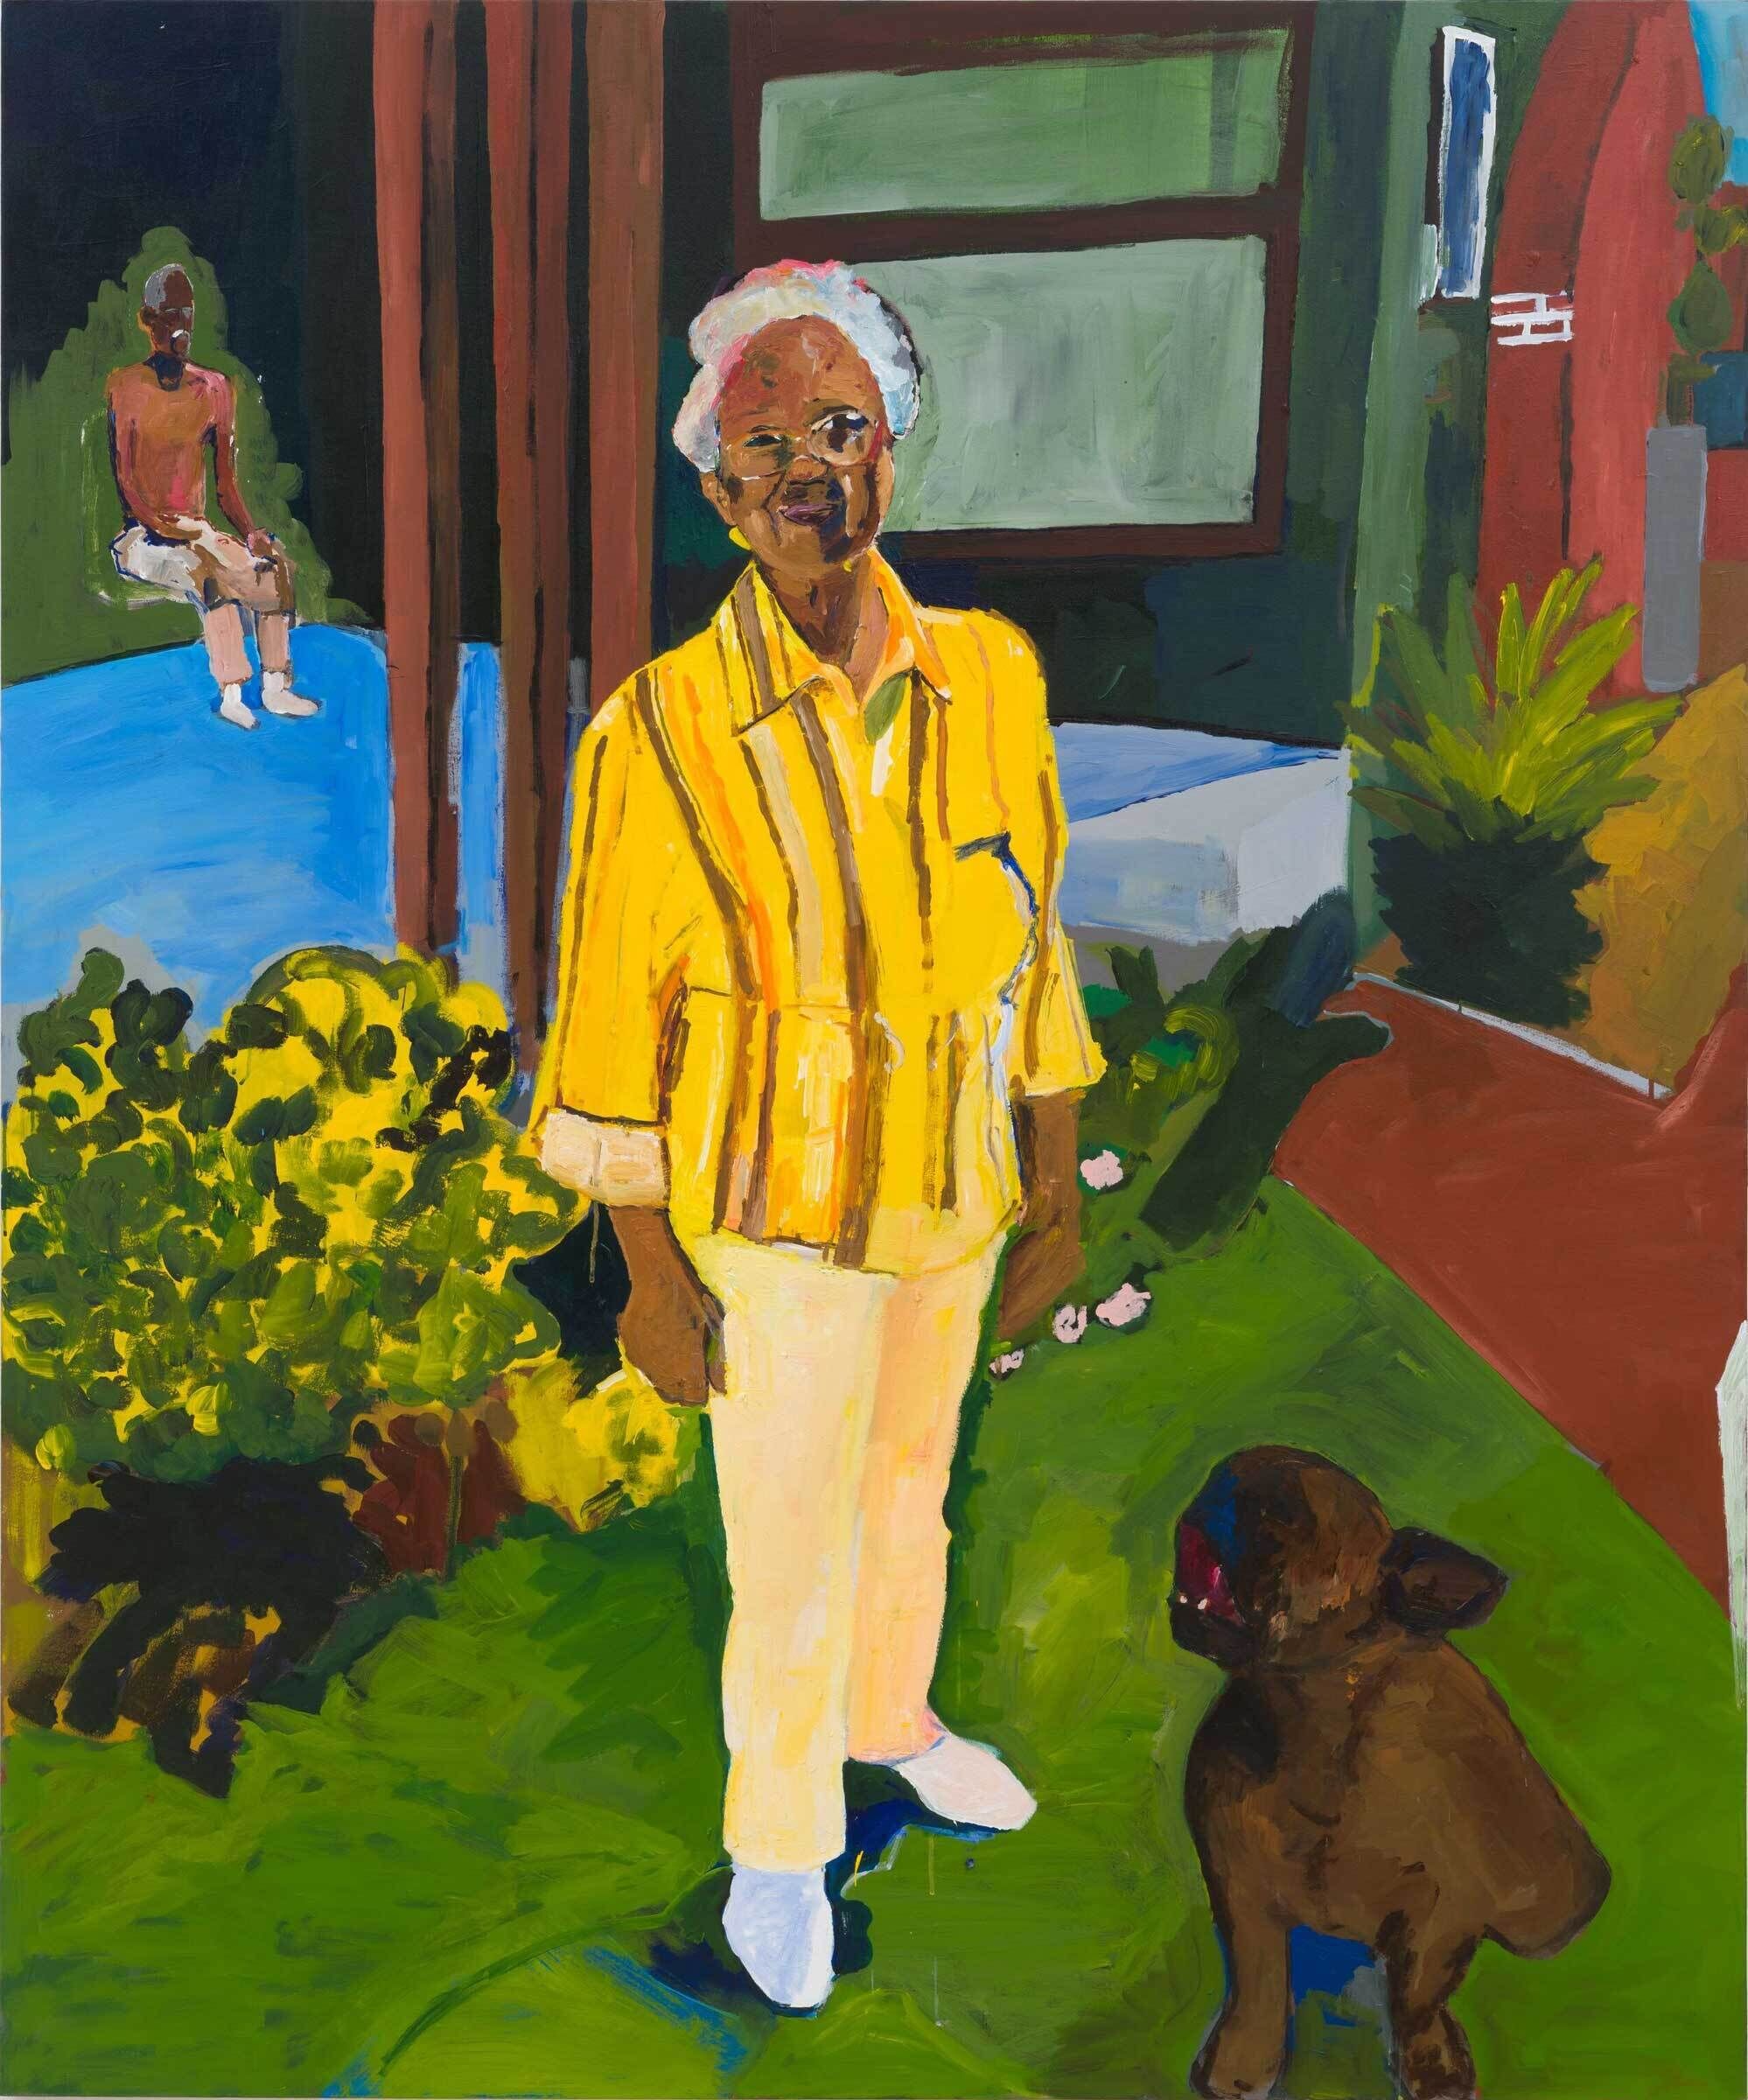 A woman stands in an all yellow outfit in a yard with a dog. In the background there is someone putting their feet in a pool.